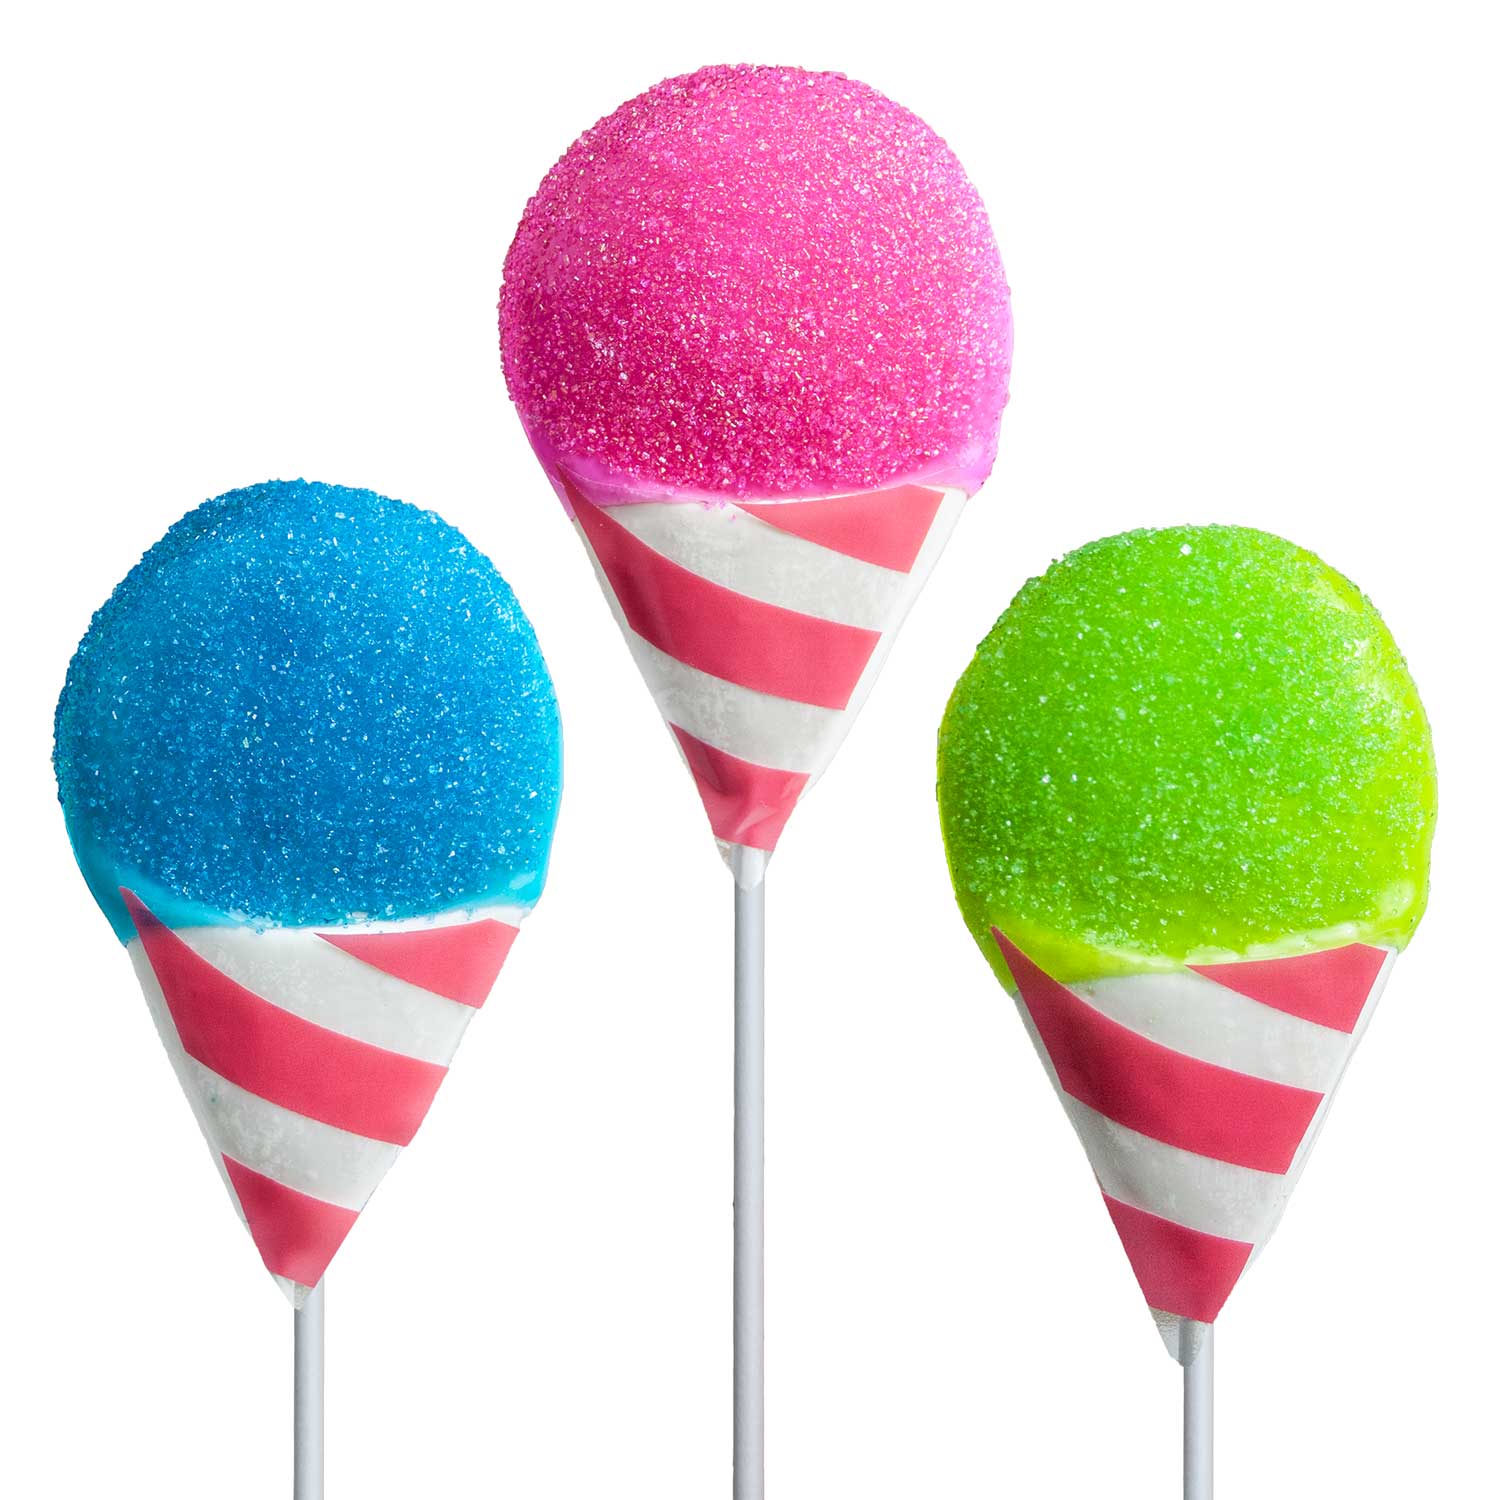 Sugar Bear Lollipops - Assorted by Melville Candy Company